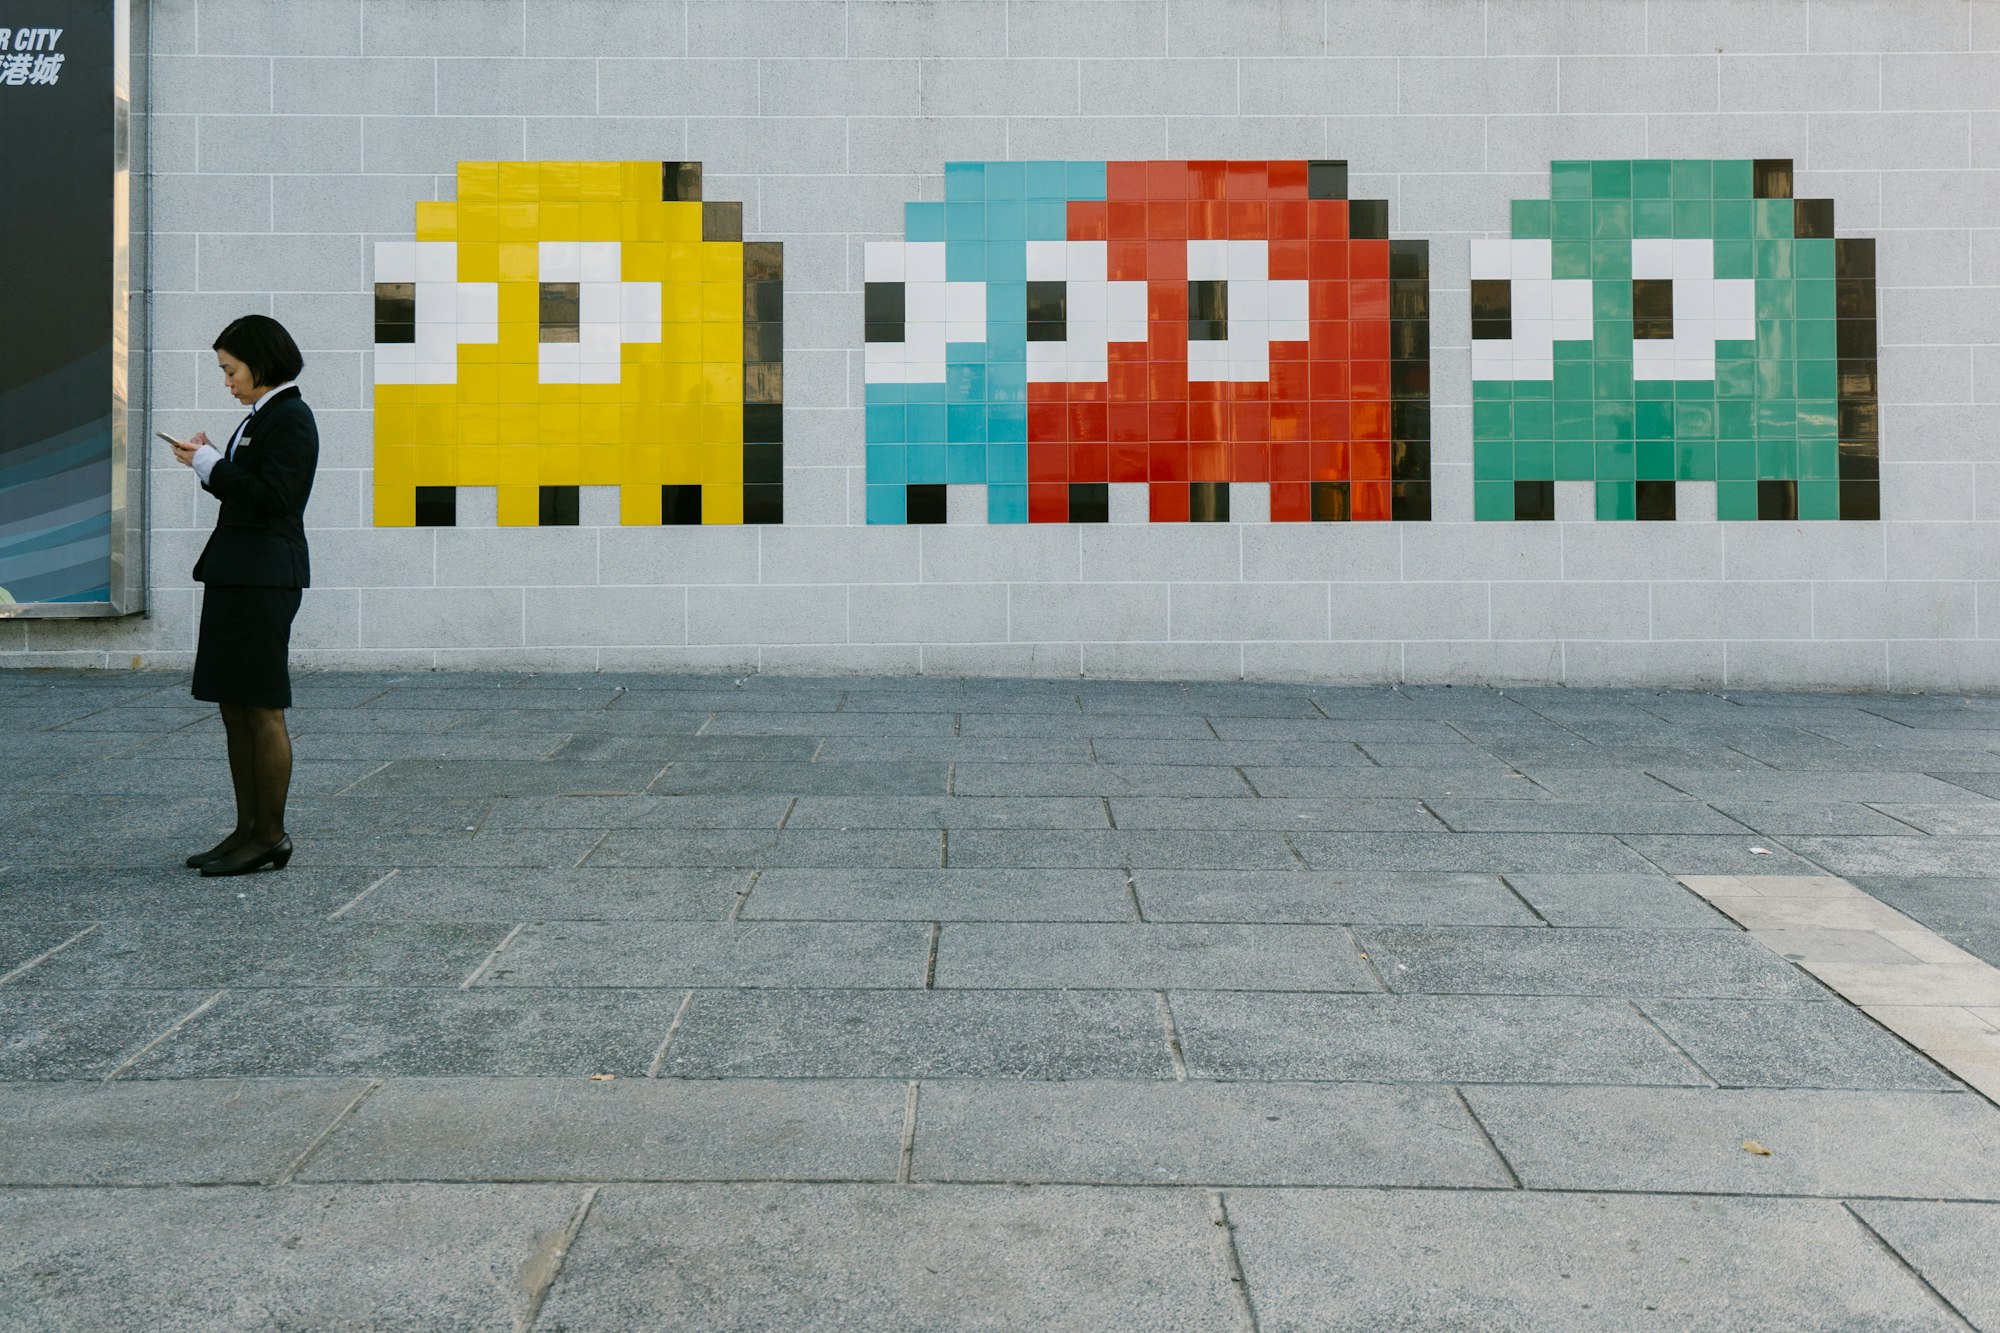 Invader art in victoria harbor.

More here https://www.flickr.com/photos/bady_qb